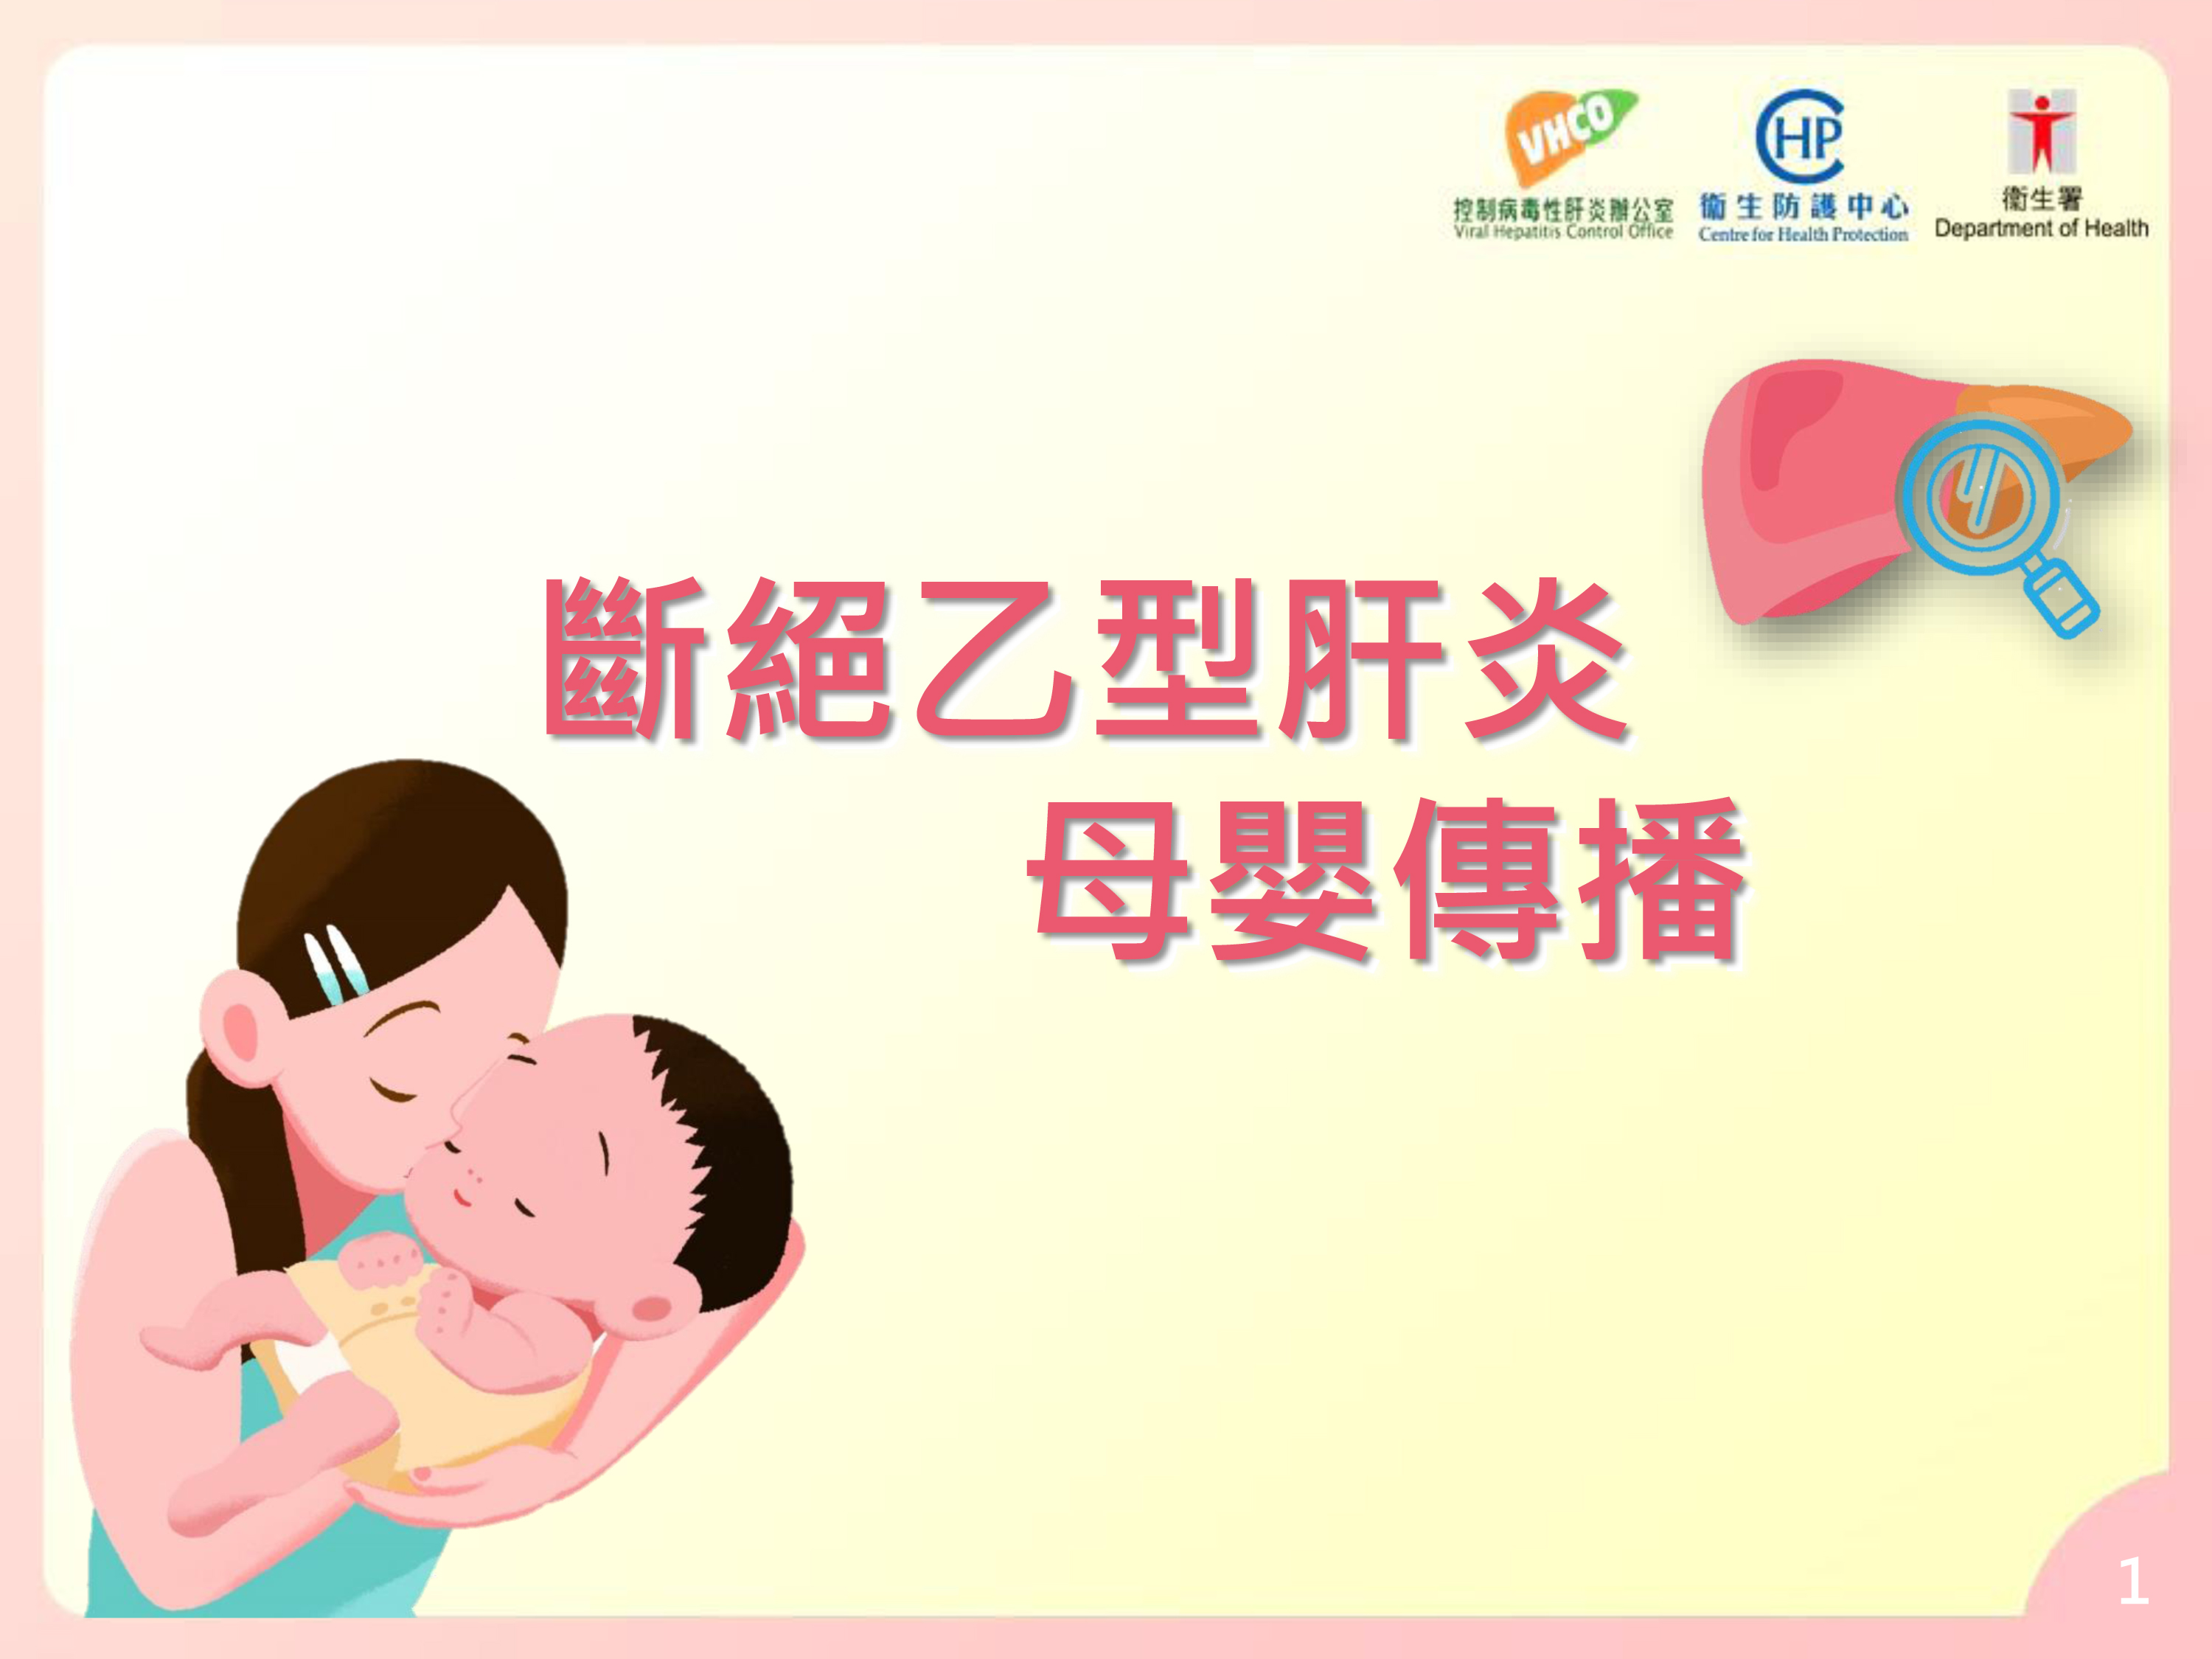 Stop Mother-to-child Transmission of Hepatitis B (only Chinese version available)